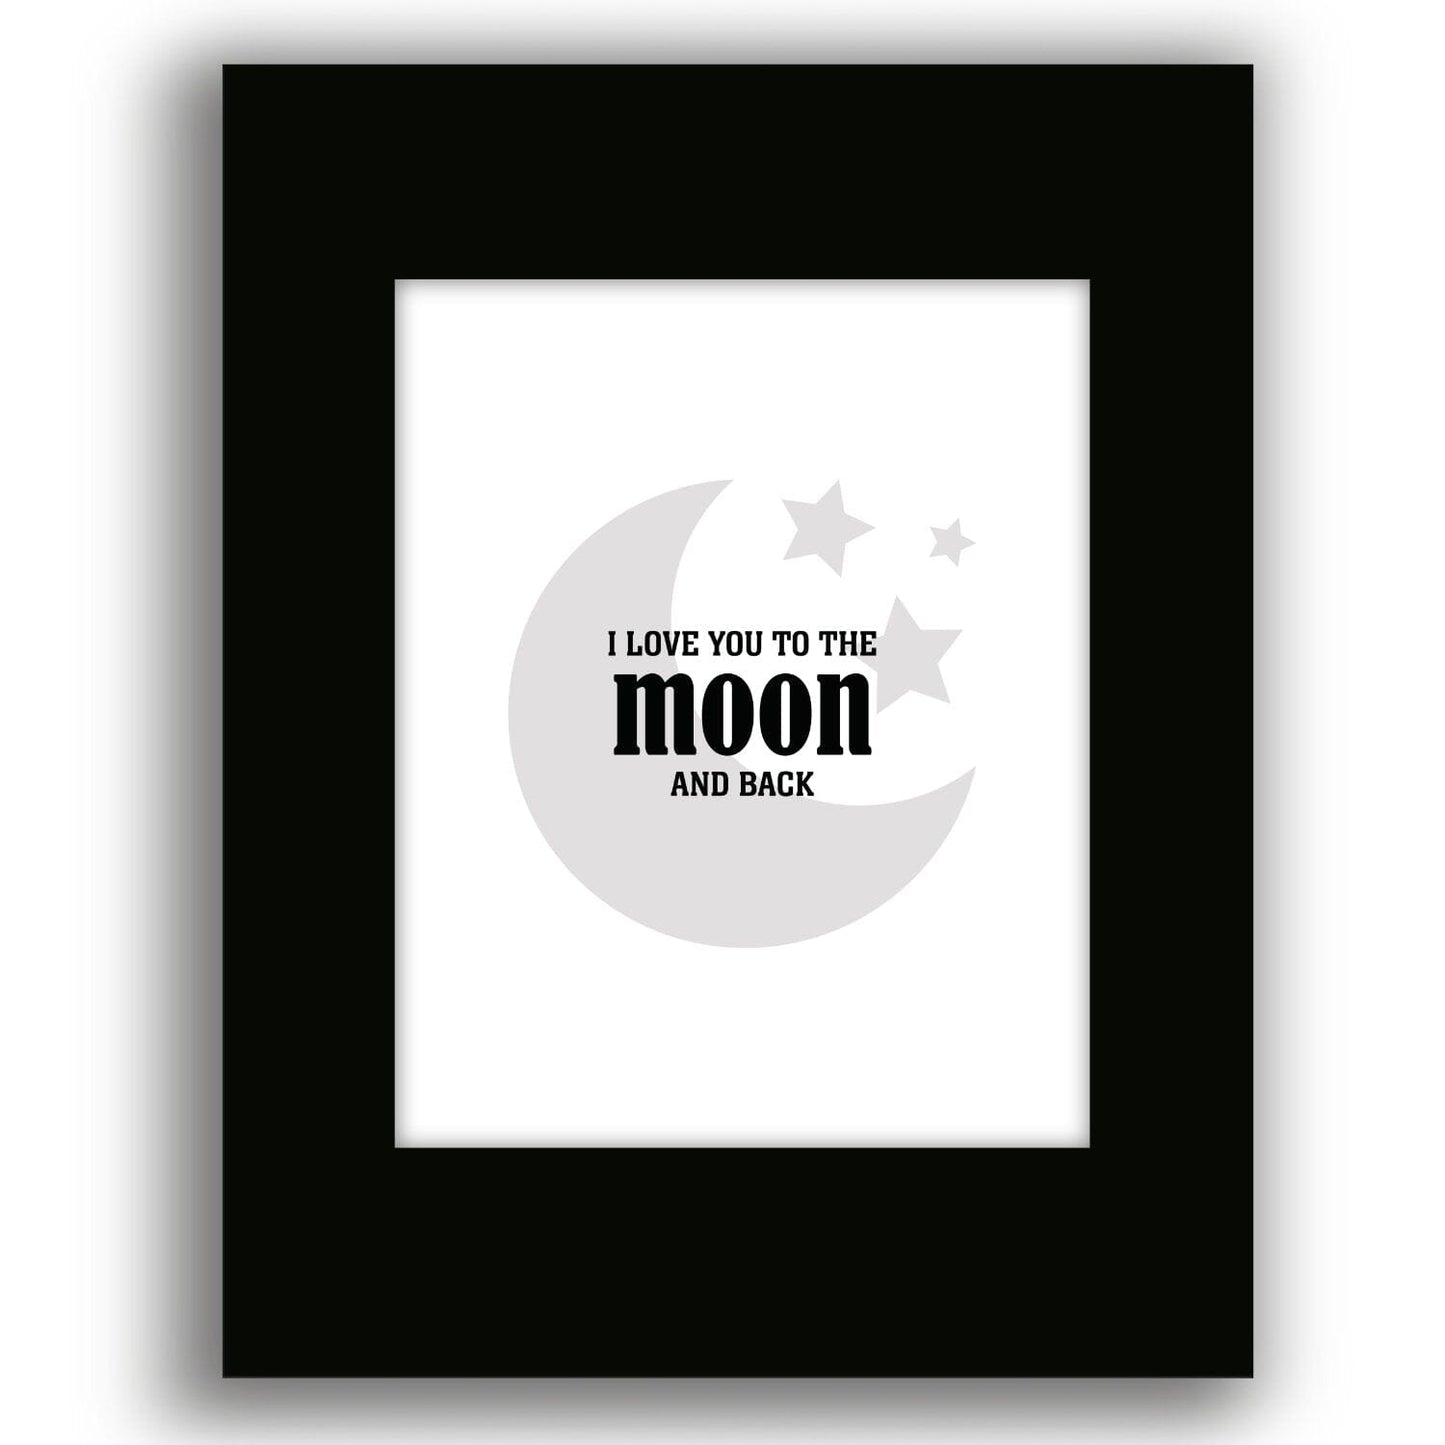 I Love You to the Moon and Back - Wise and Witty Art Wise and Wiseass Quotes Song Lyrics Art 8x10 Black Matted Print 